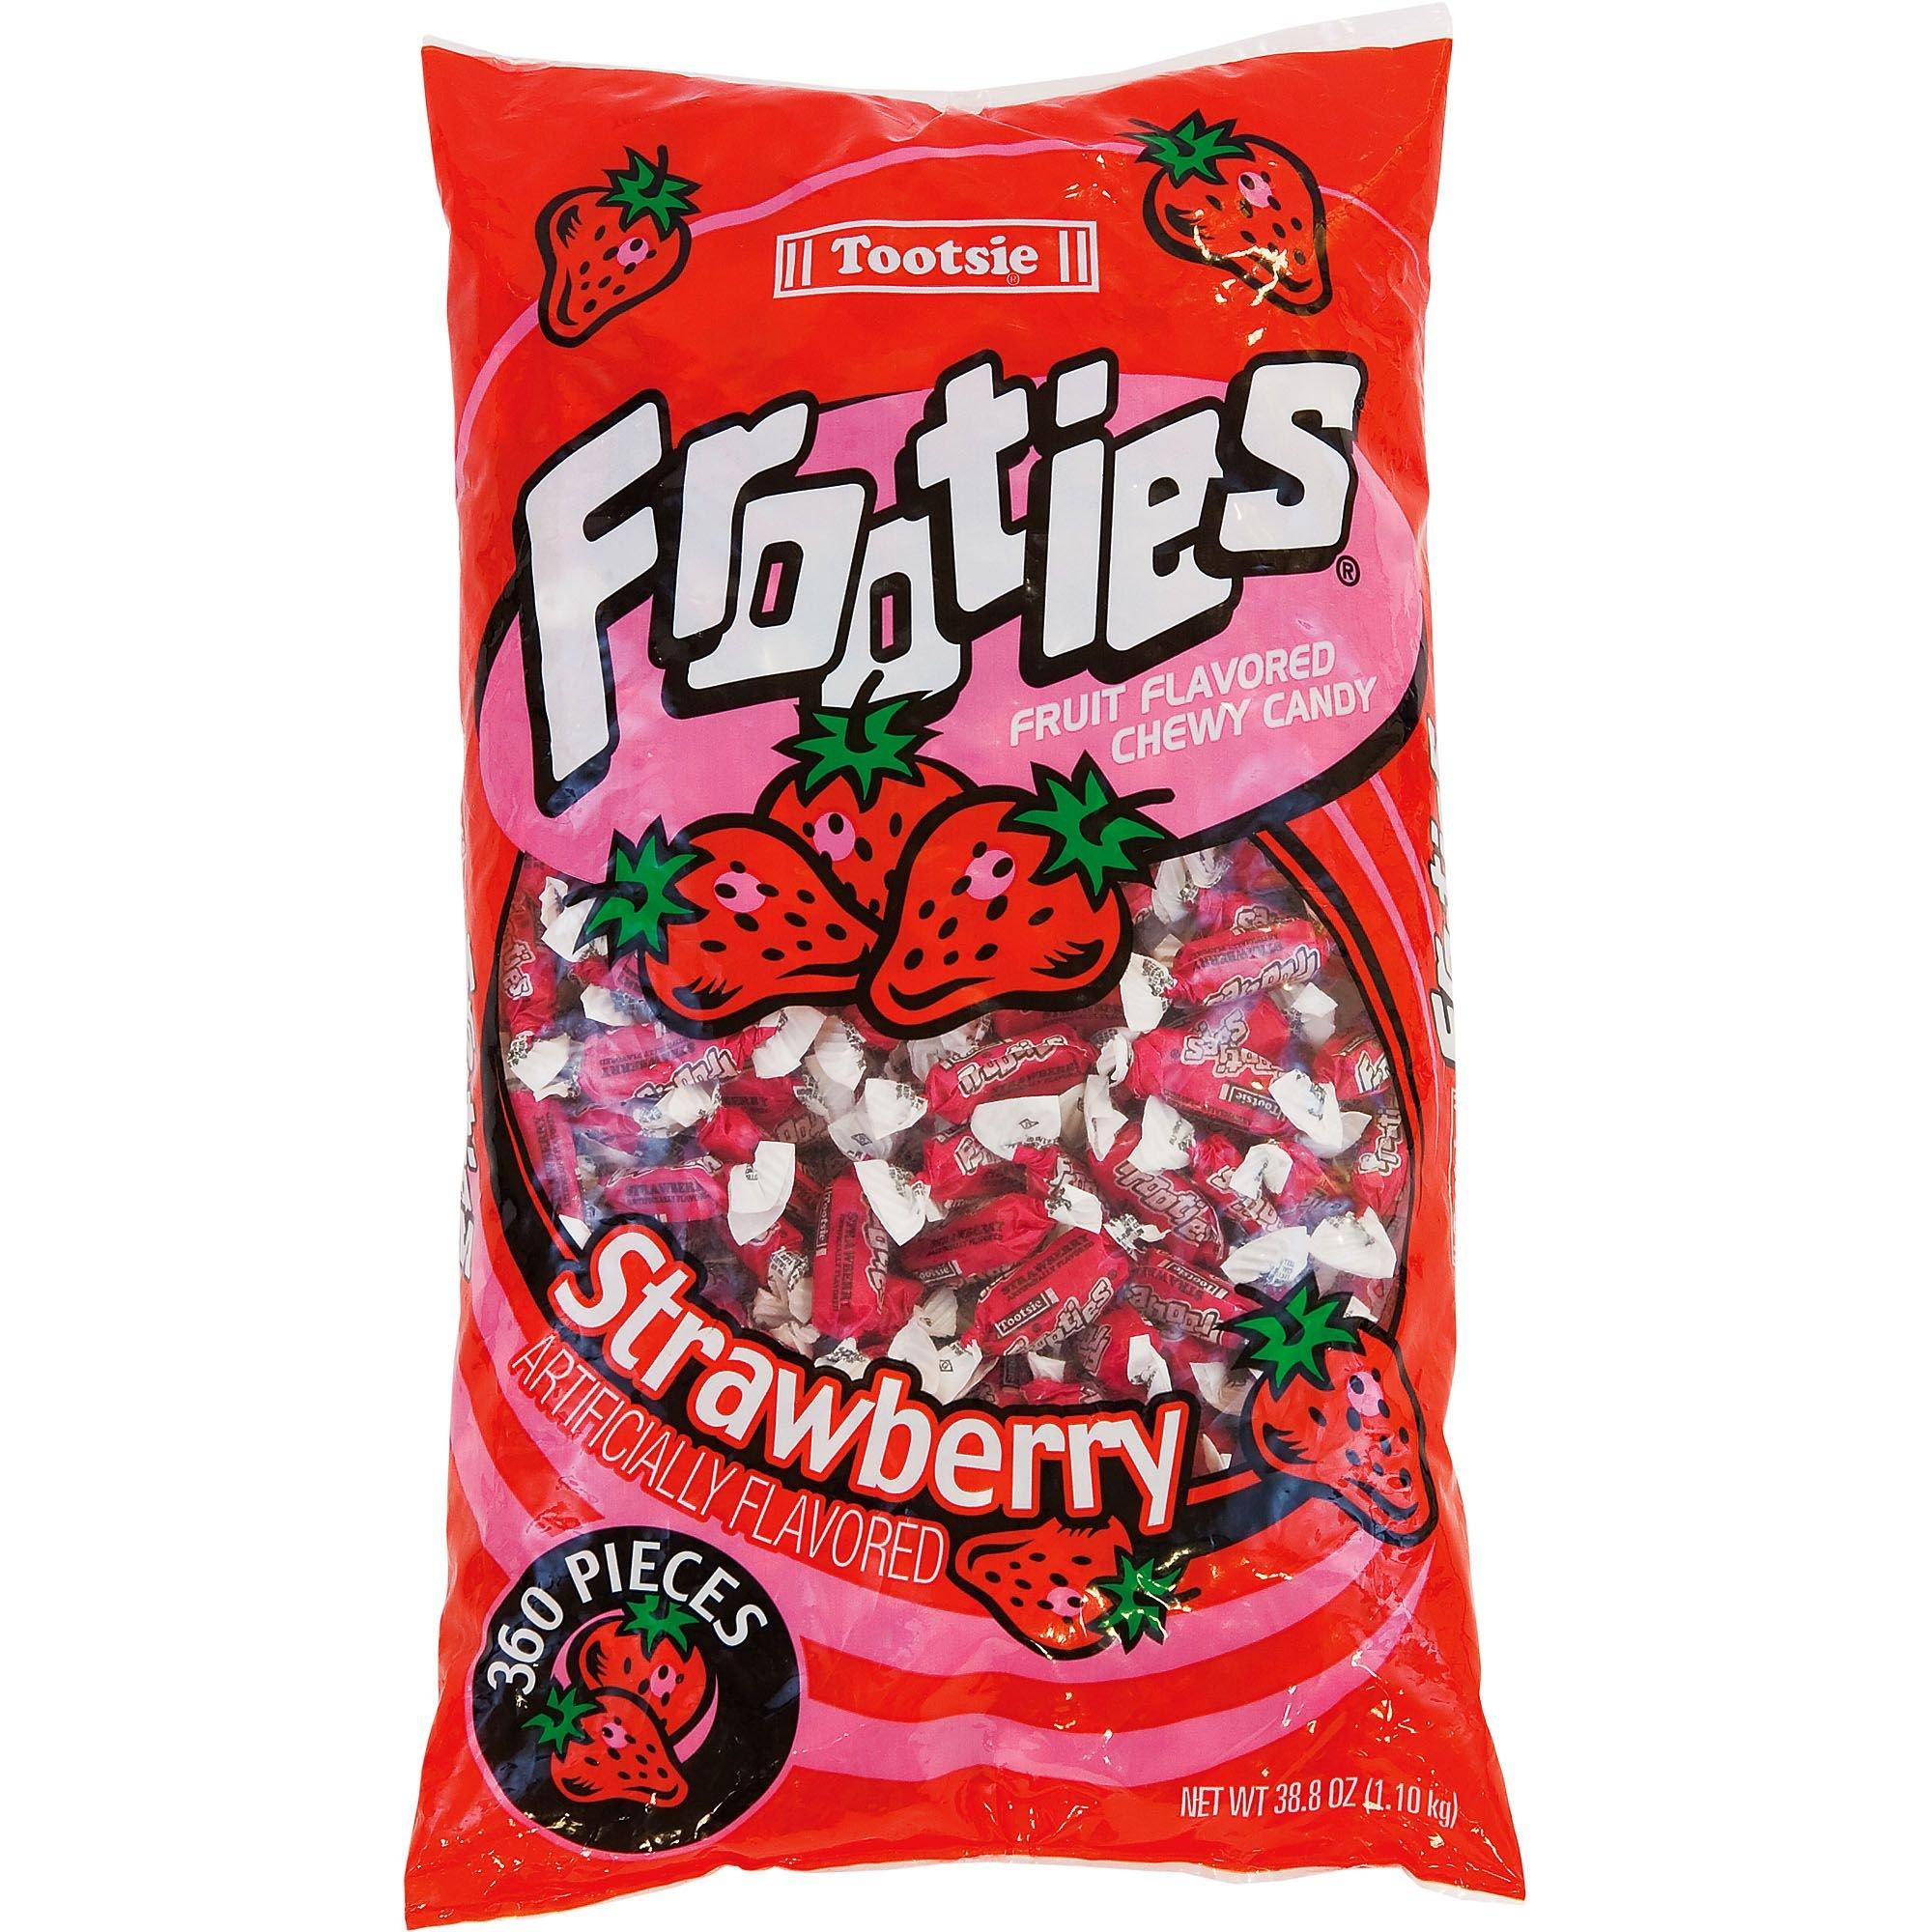 Frooties Chewy Candy 360ct